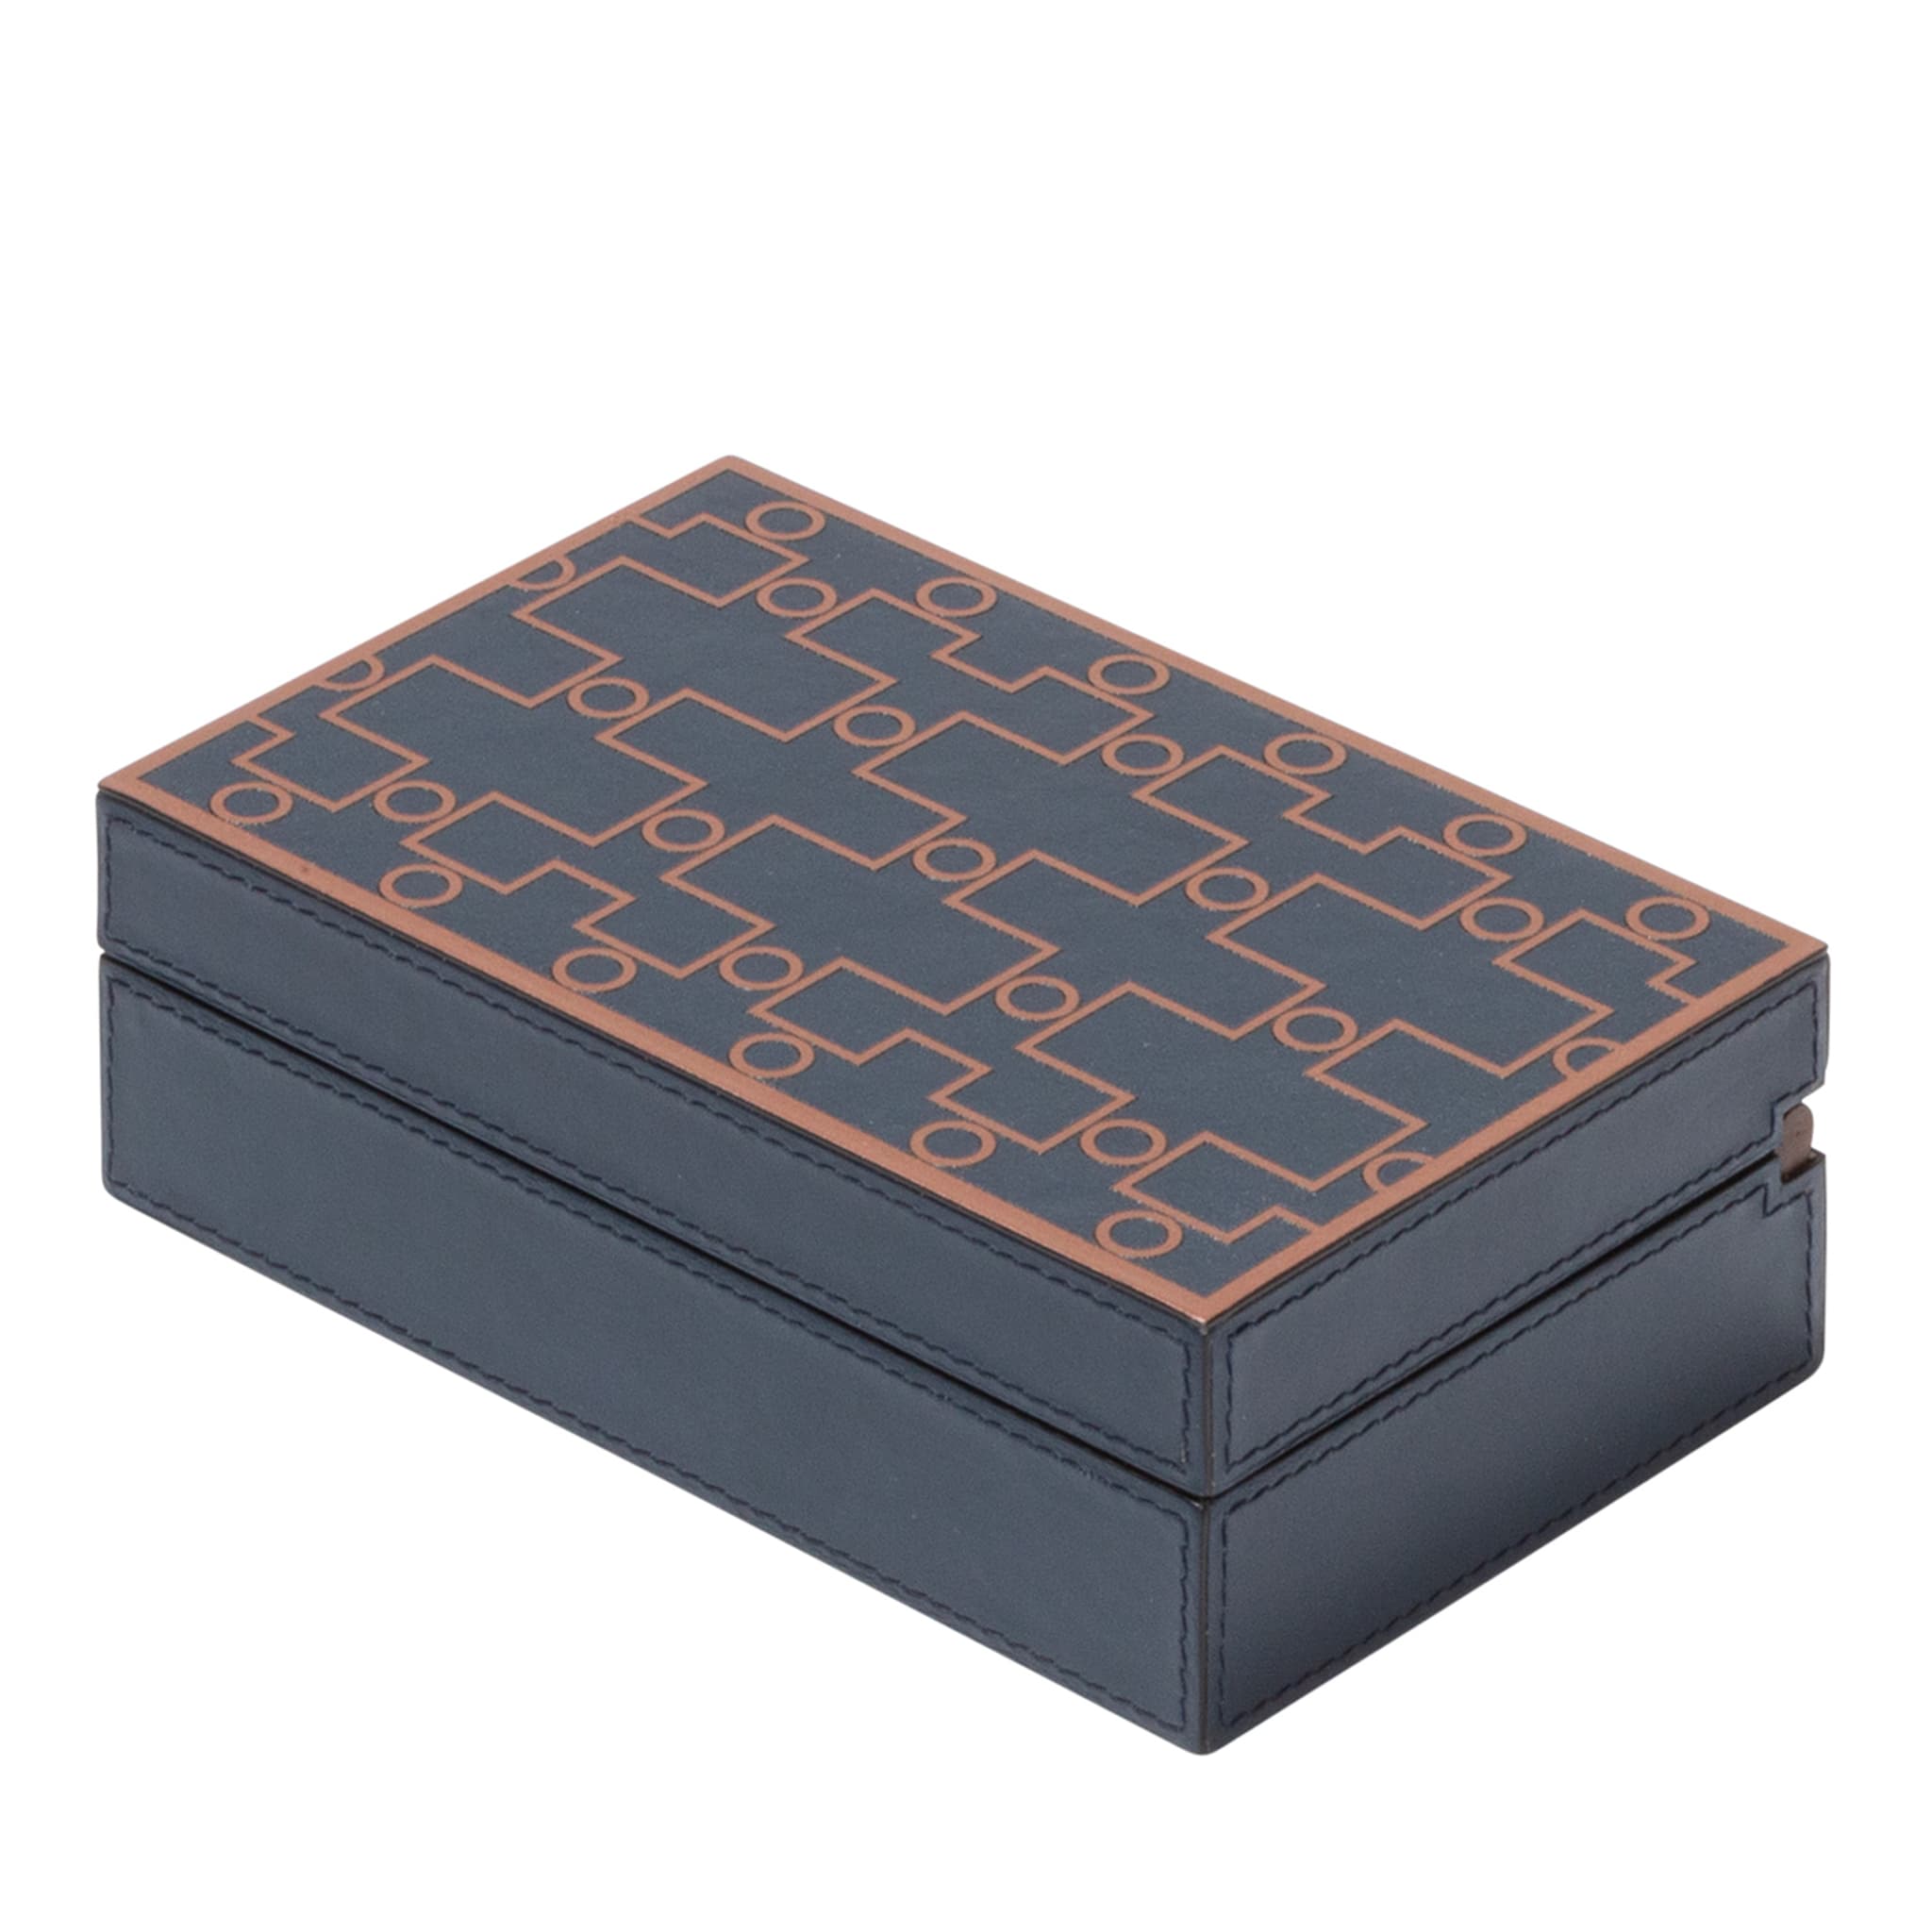 San Marco Dice and Playing Card Holder Box - Main view